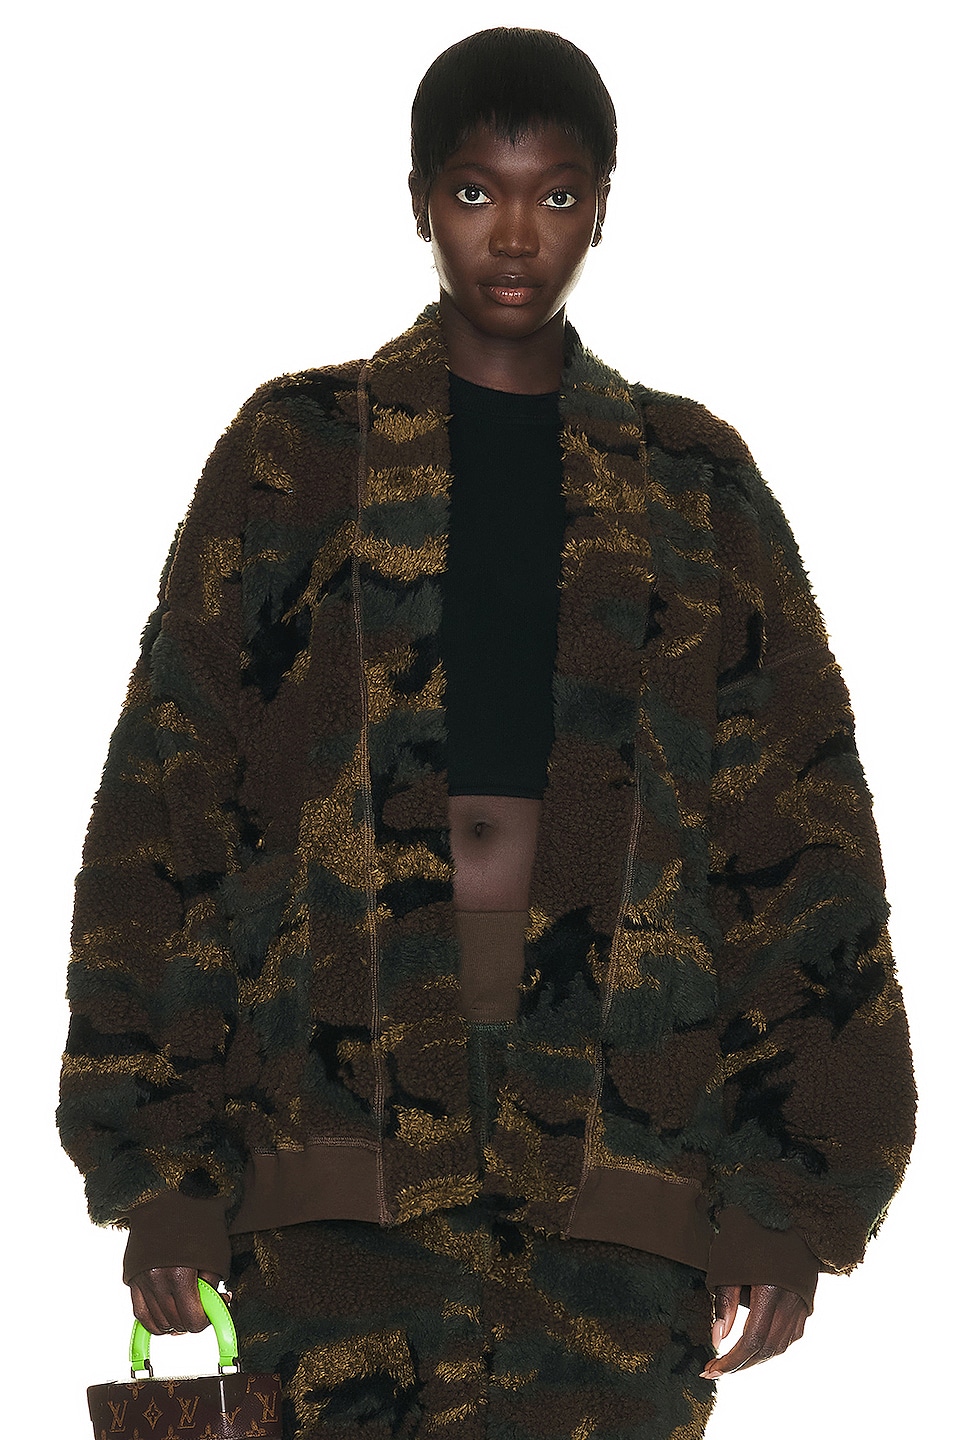 Image 1 of Camp High Robe in Camo